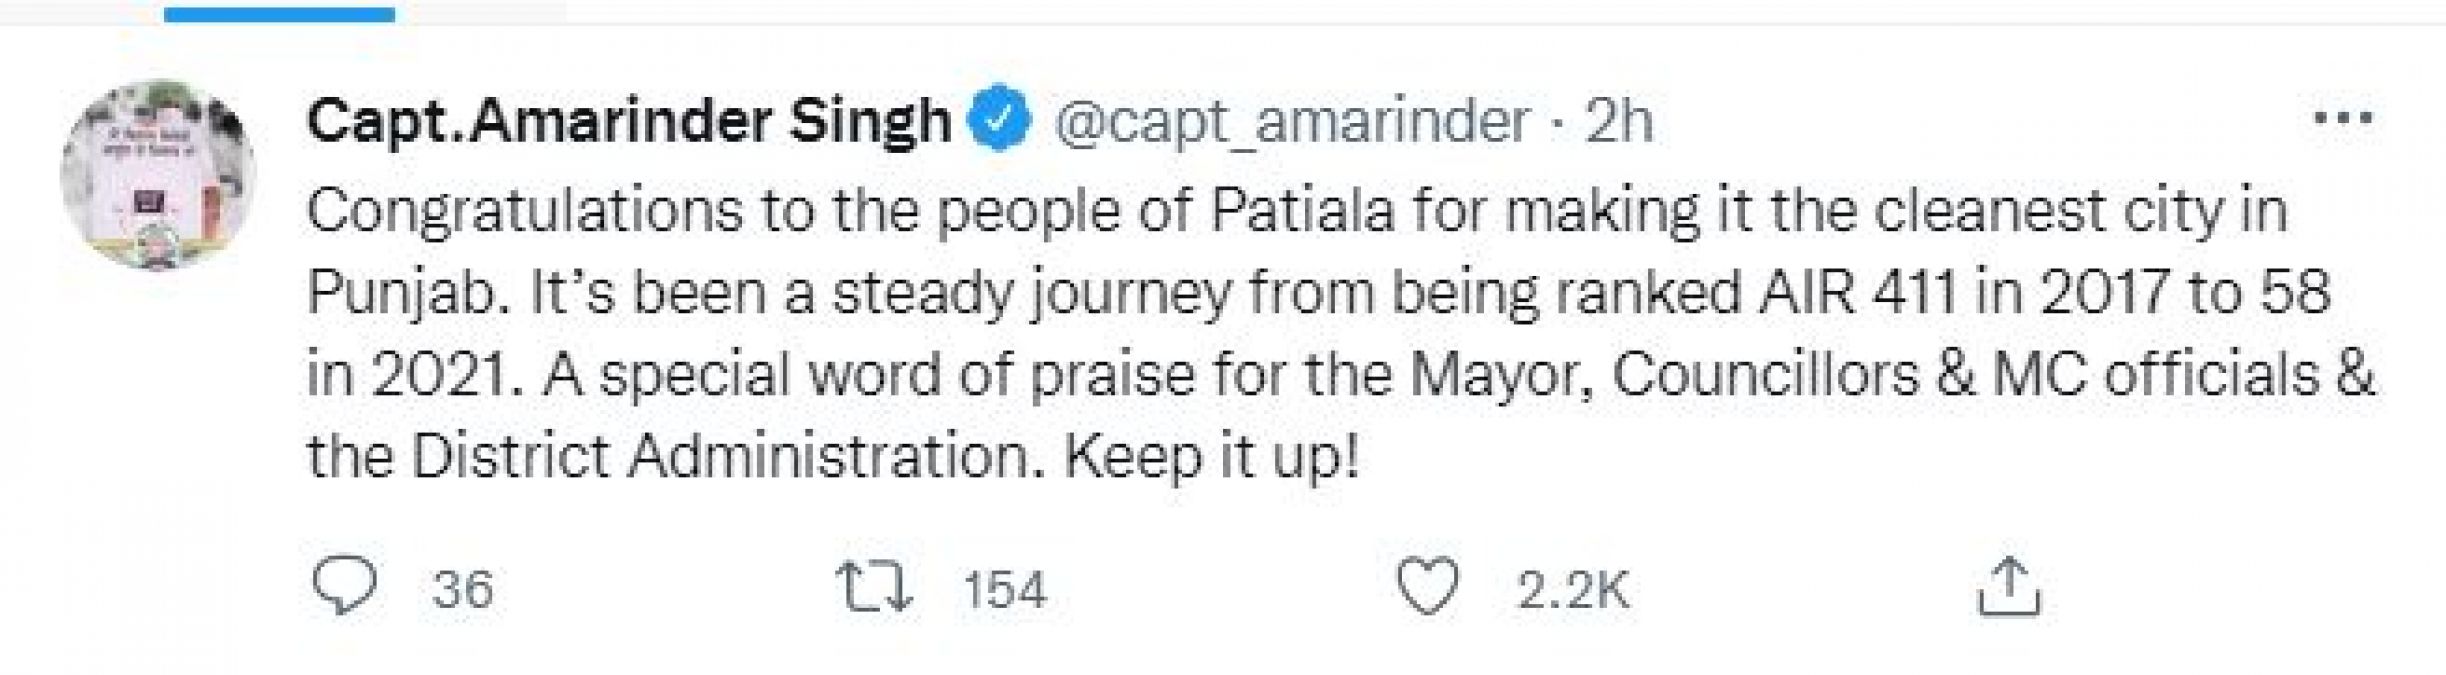 Captain Amarinder to contest from Patiala